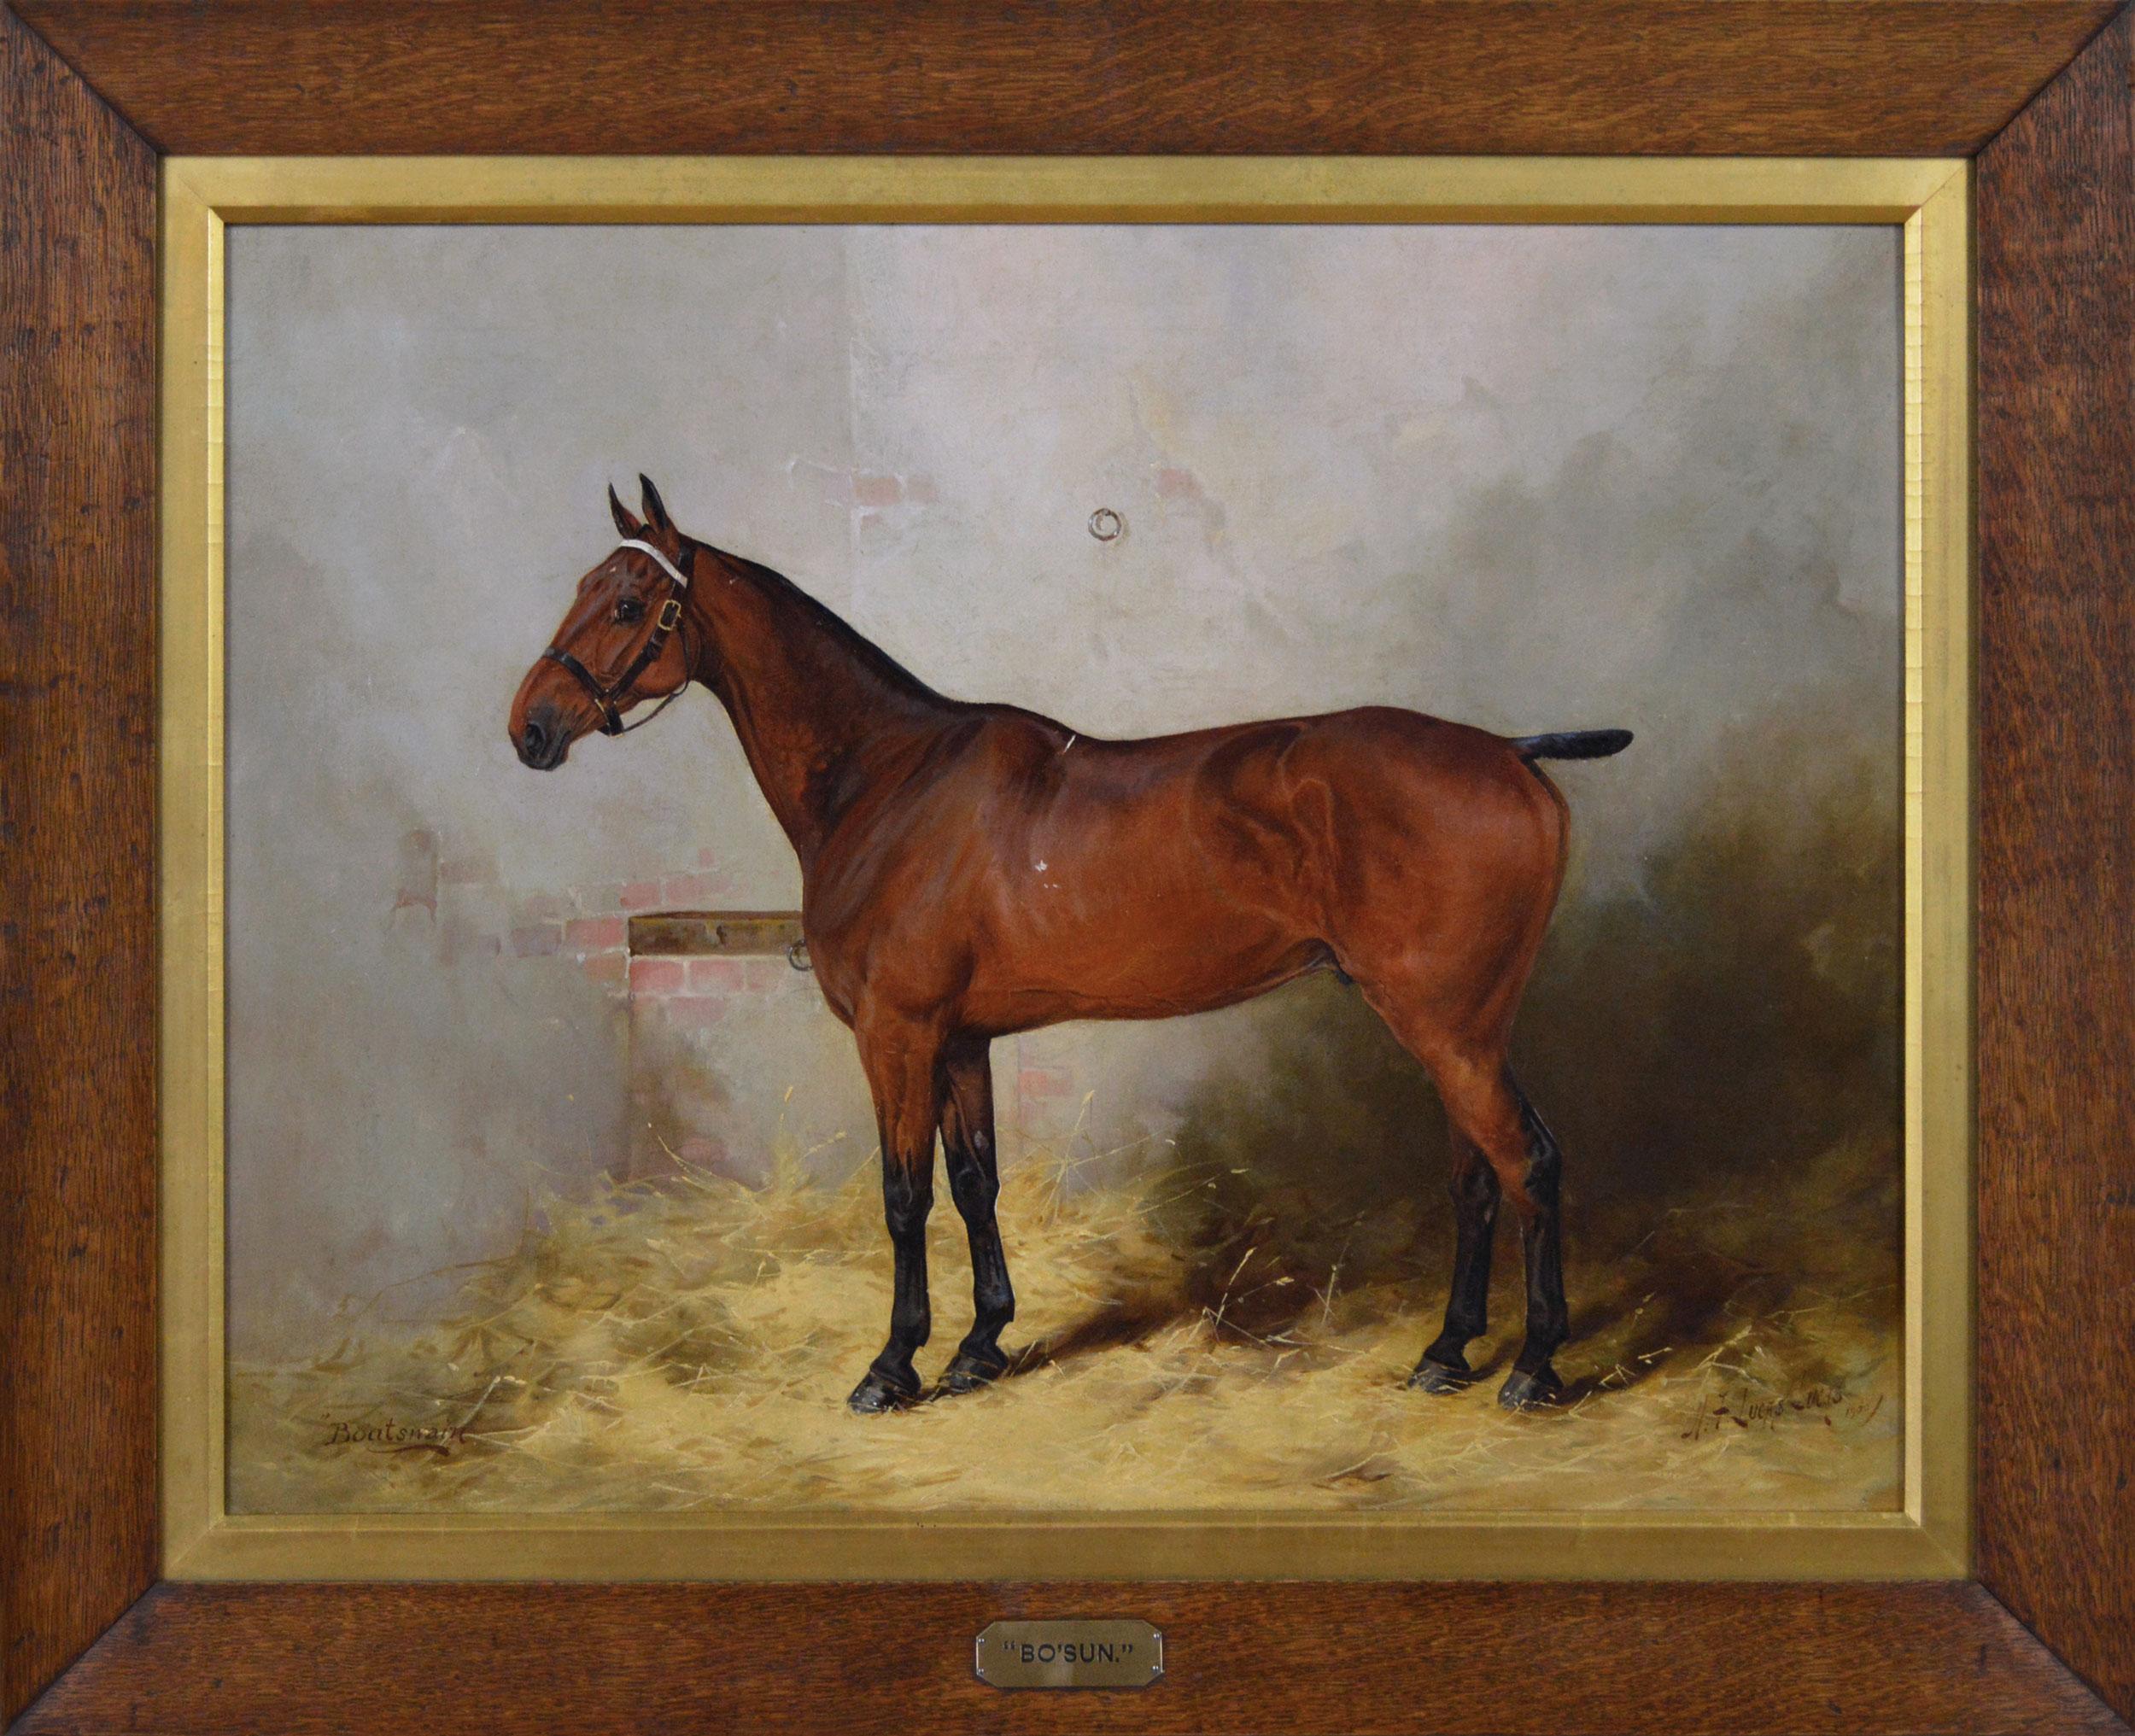 Henry Frederick Lucas Lucas  Animal Painting - Horse portrait oil painting of a bay stallion 